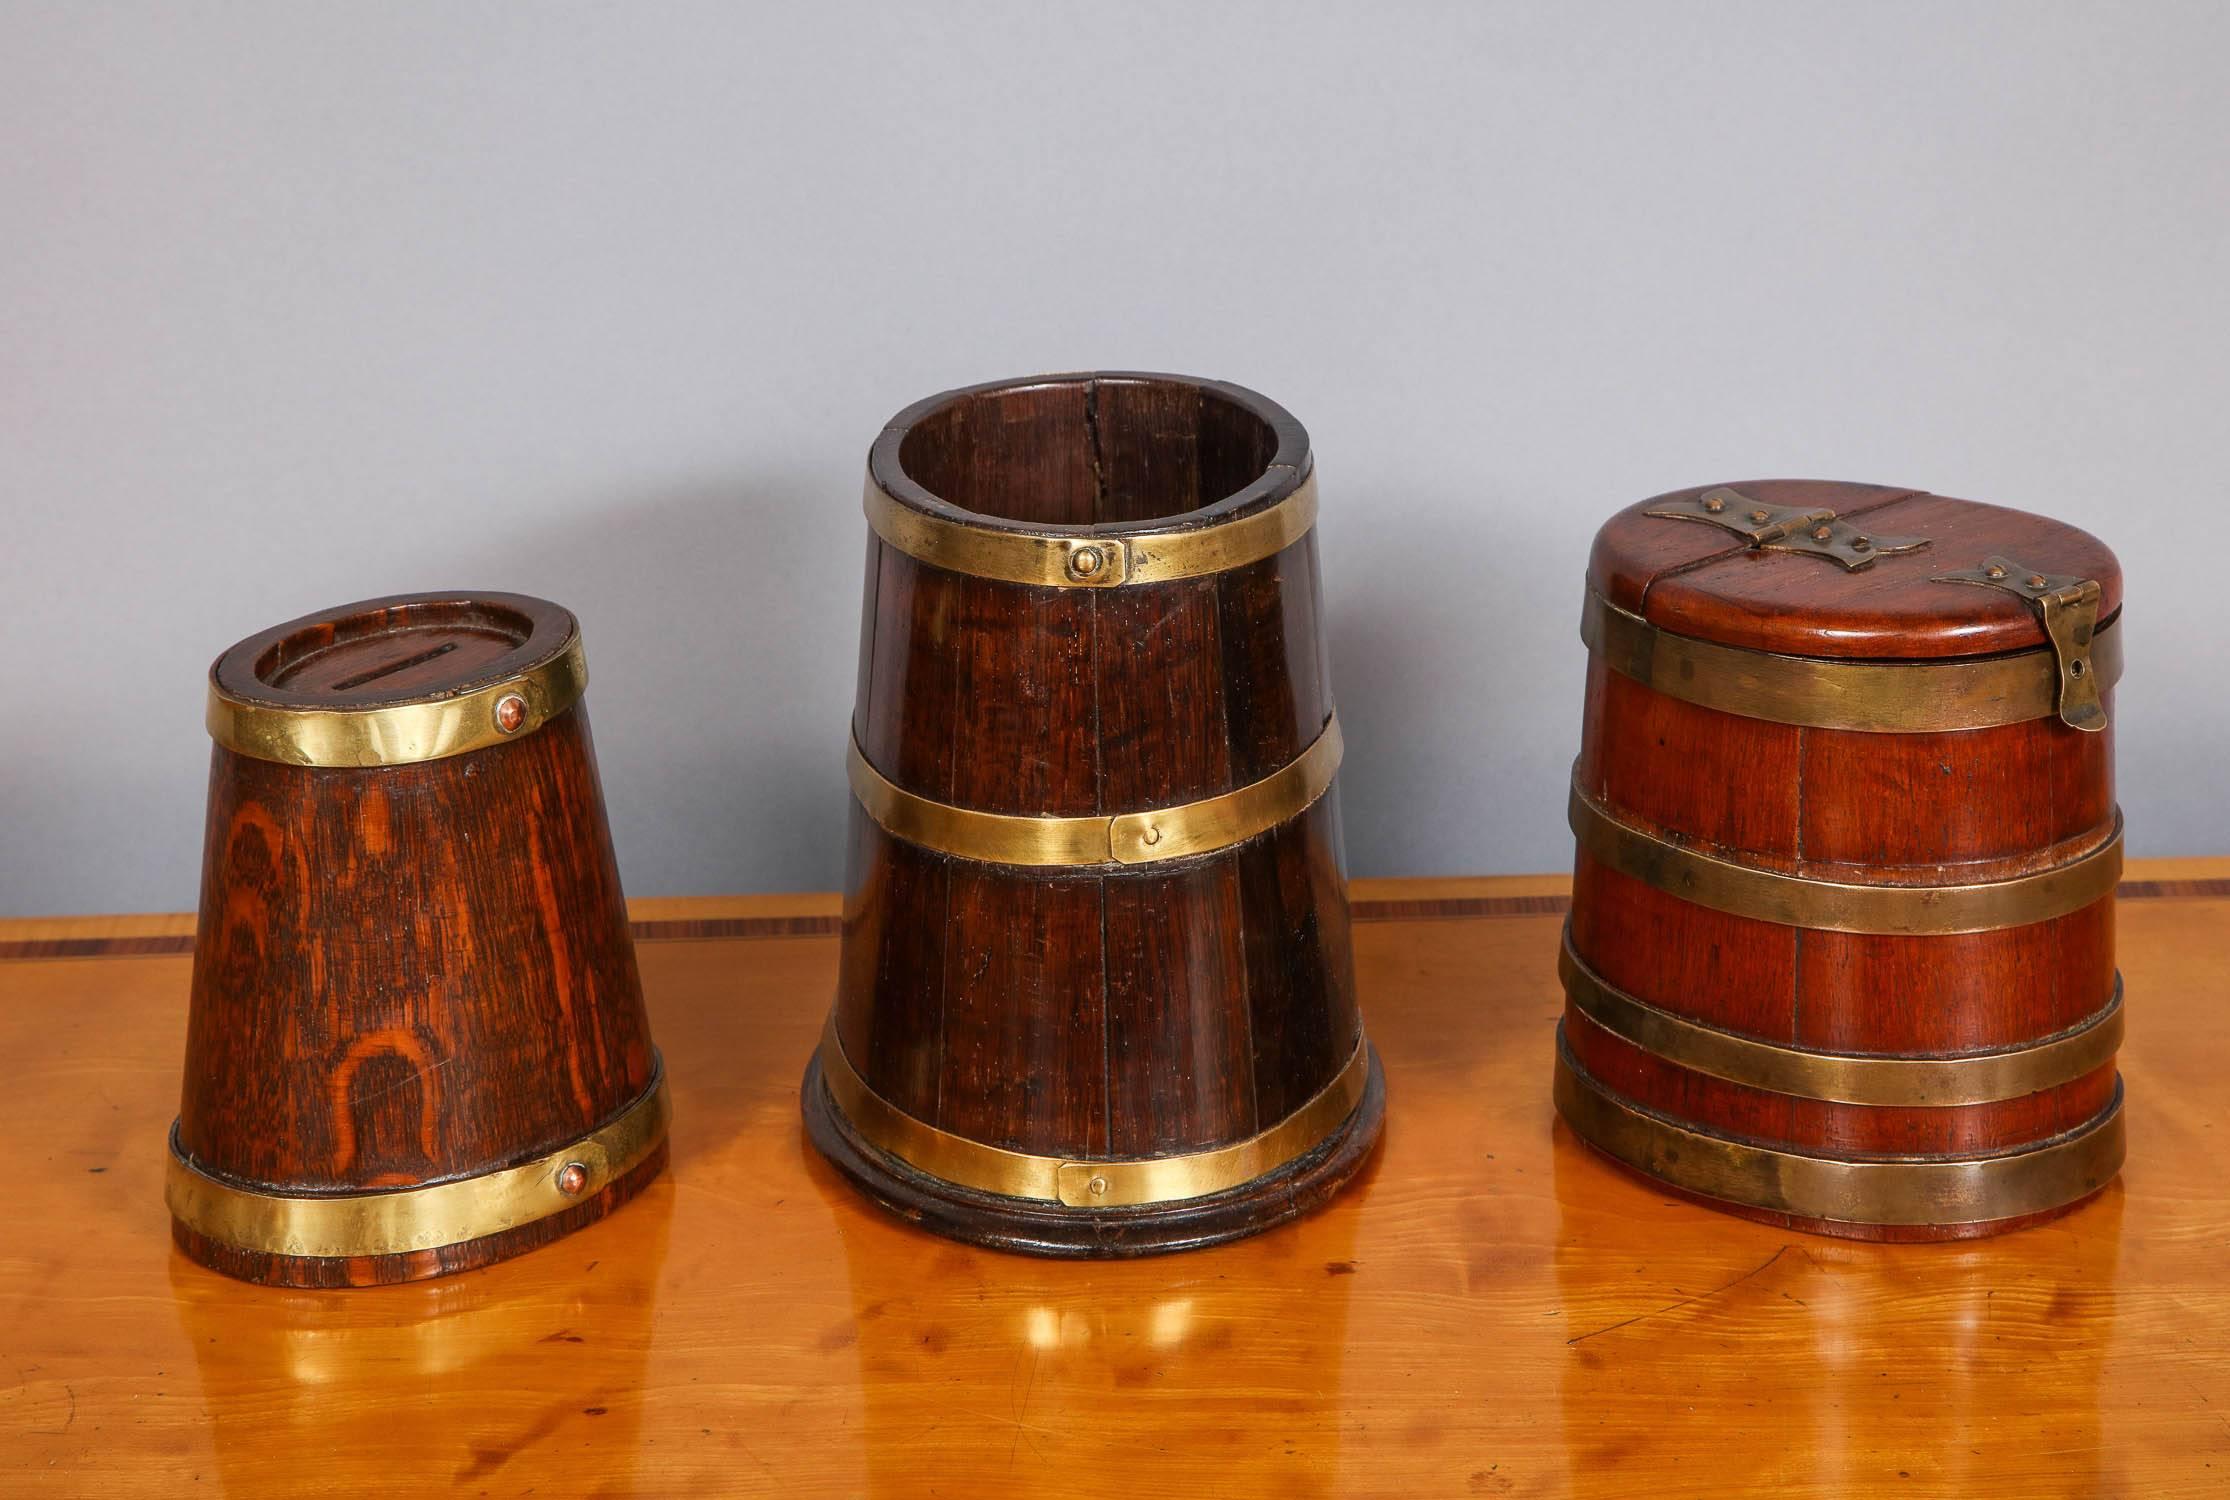 Lovely collection of three English 19th century brass bound staved vessels all of oval flaring form, the first (with two bands) an oak money bank in the form of a ship's tobacco barrel, the second (three bands) an early 19th Century Georgian